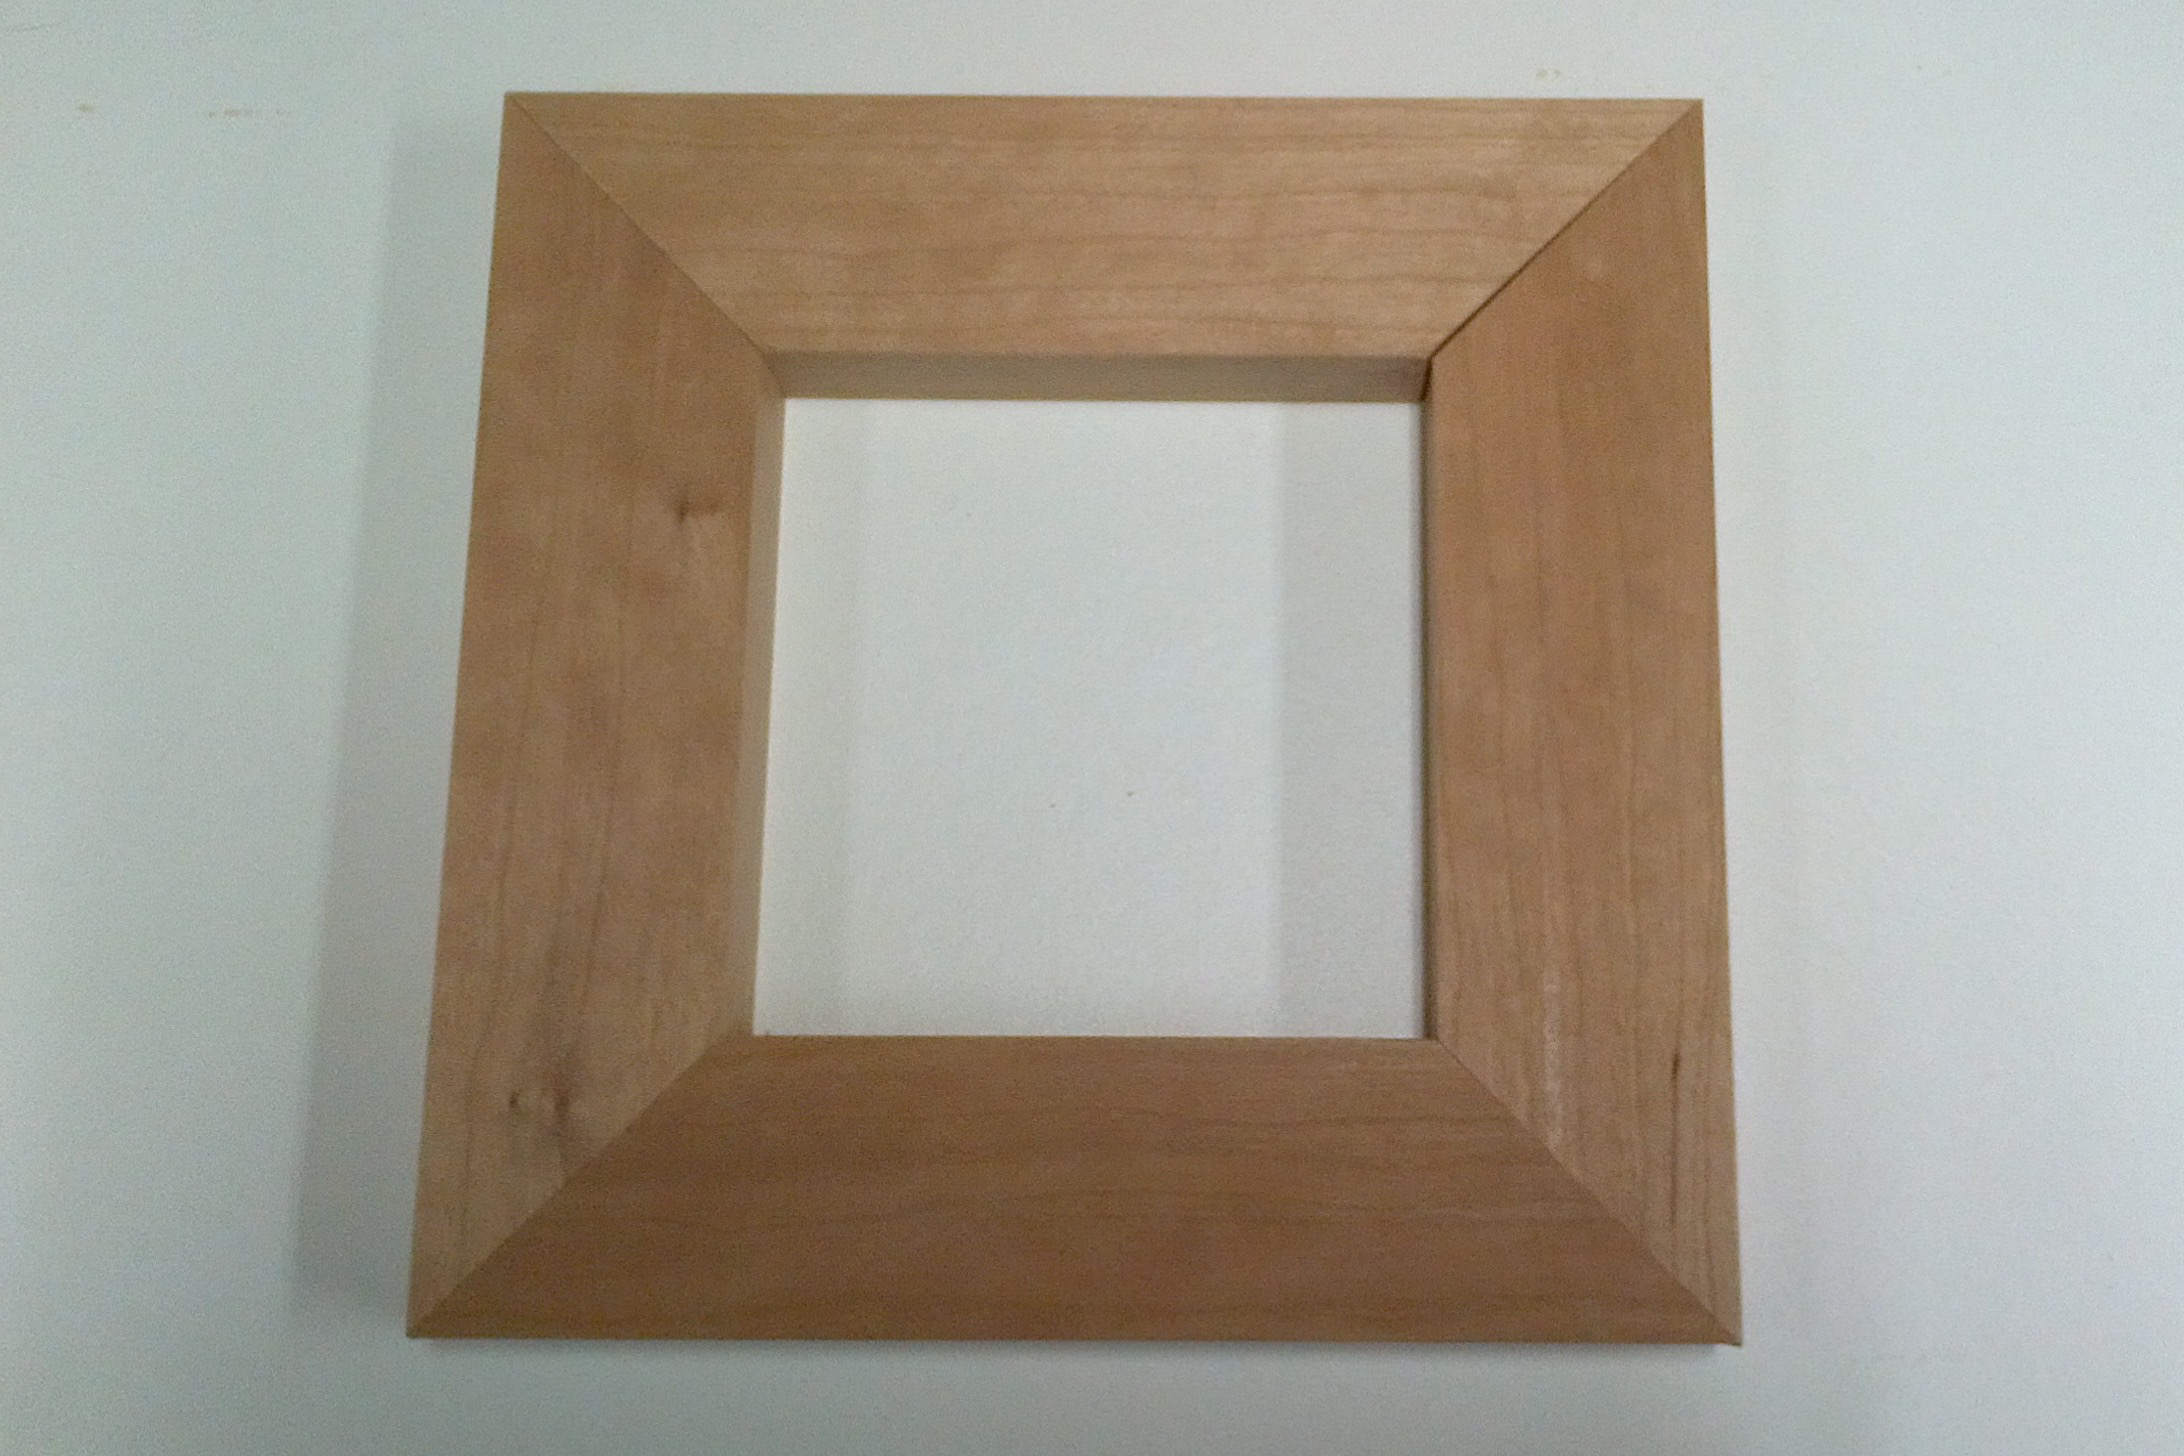 Cut Perfect Miter Joints in 3 Steps